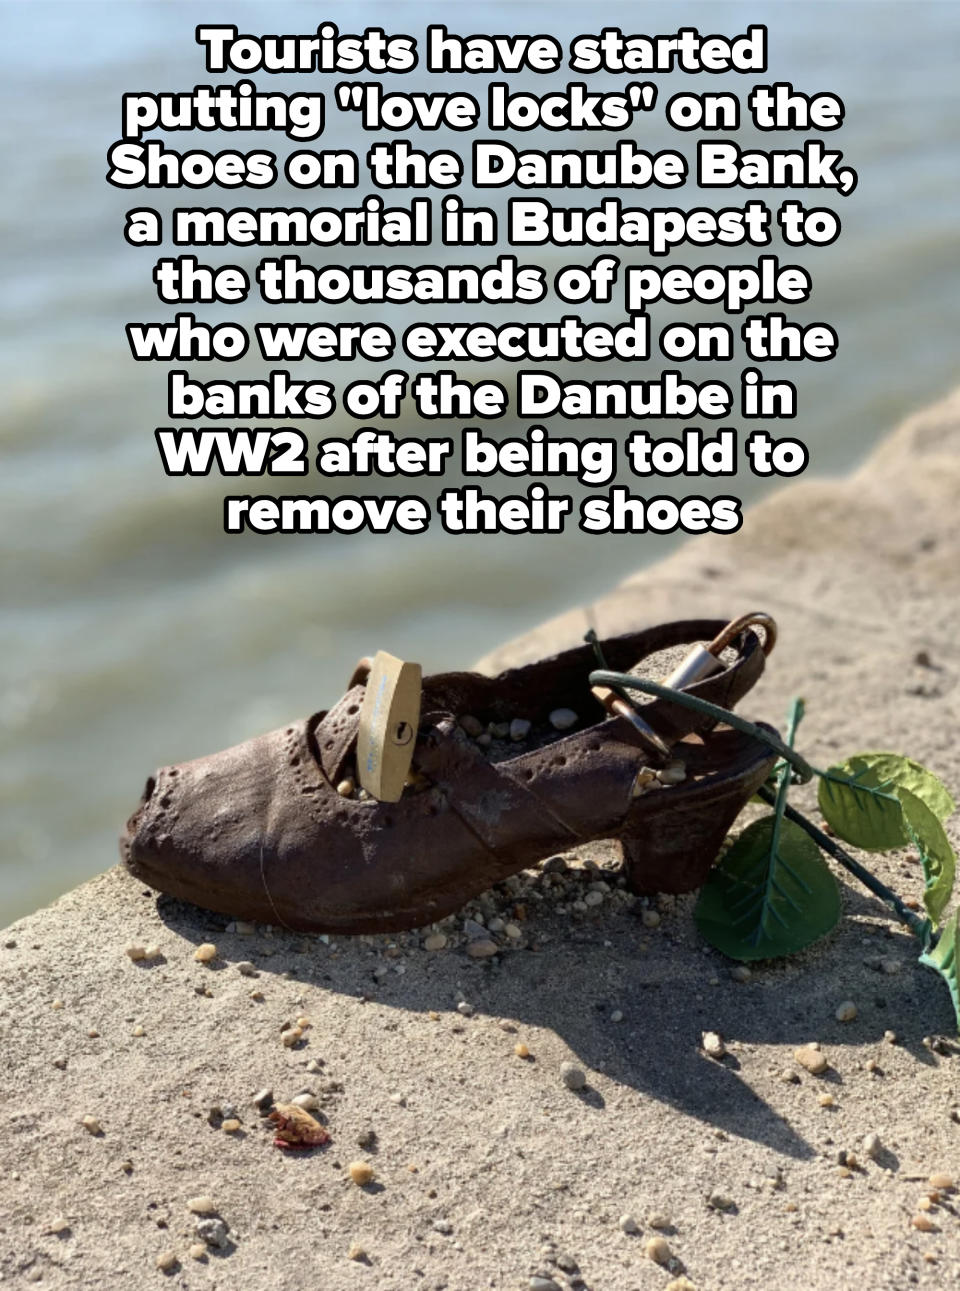 A single, worn shoe with a small wooden block inside, placed on sandy ground near water with a leaf to the side